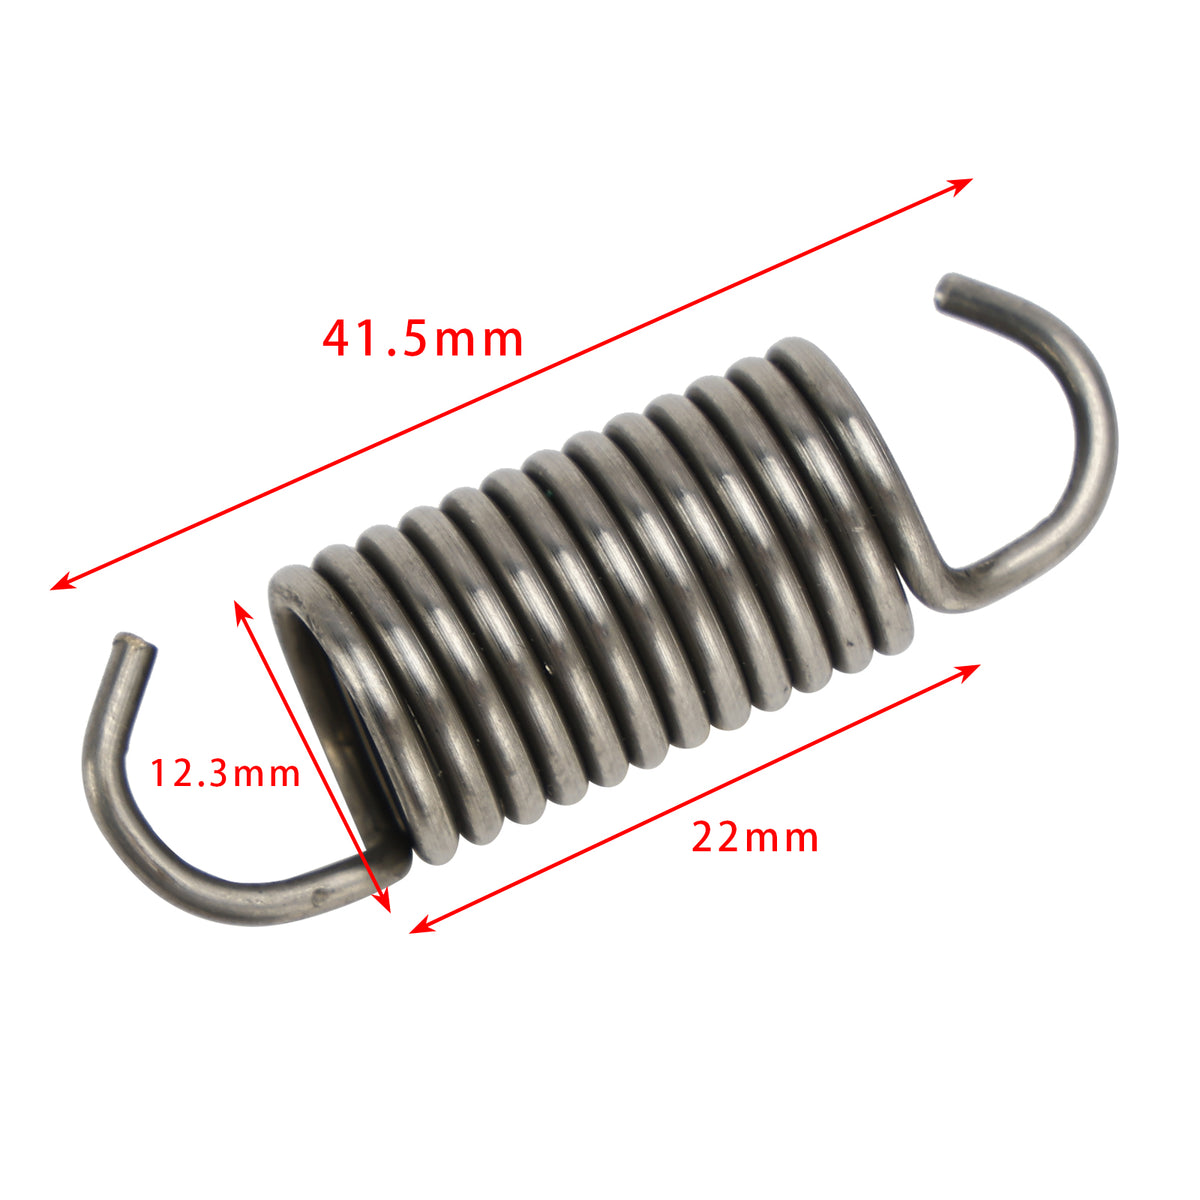 Yamaha PW50 Y-Zinger Ma50m Clutch Weight Spring Kit 3l5-16627-02